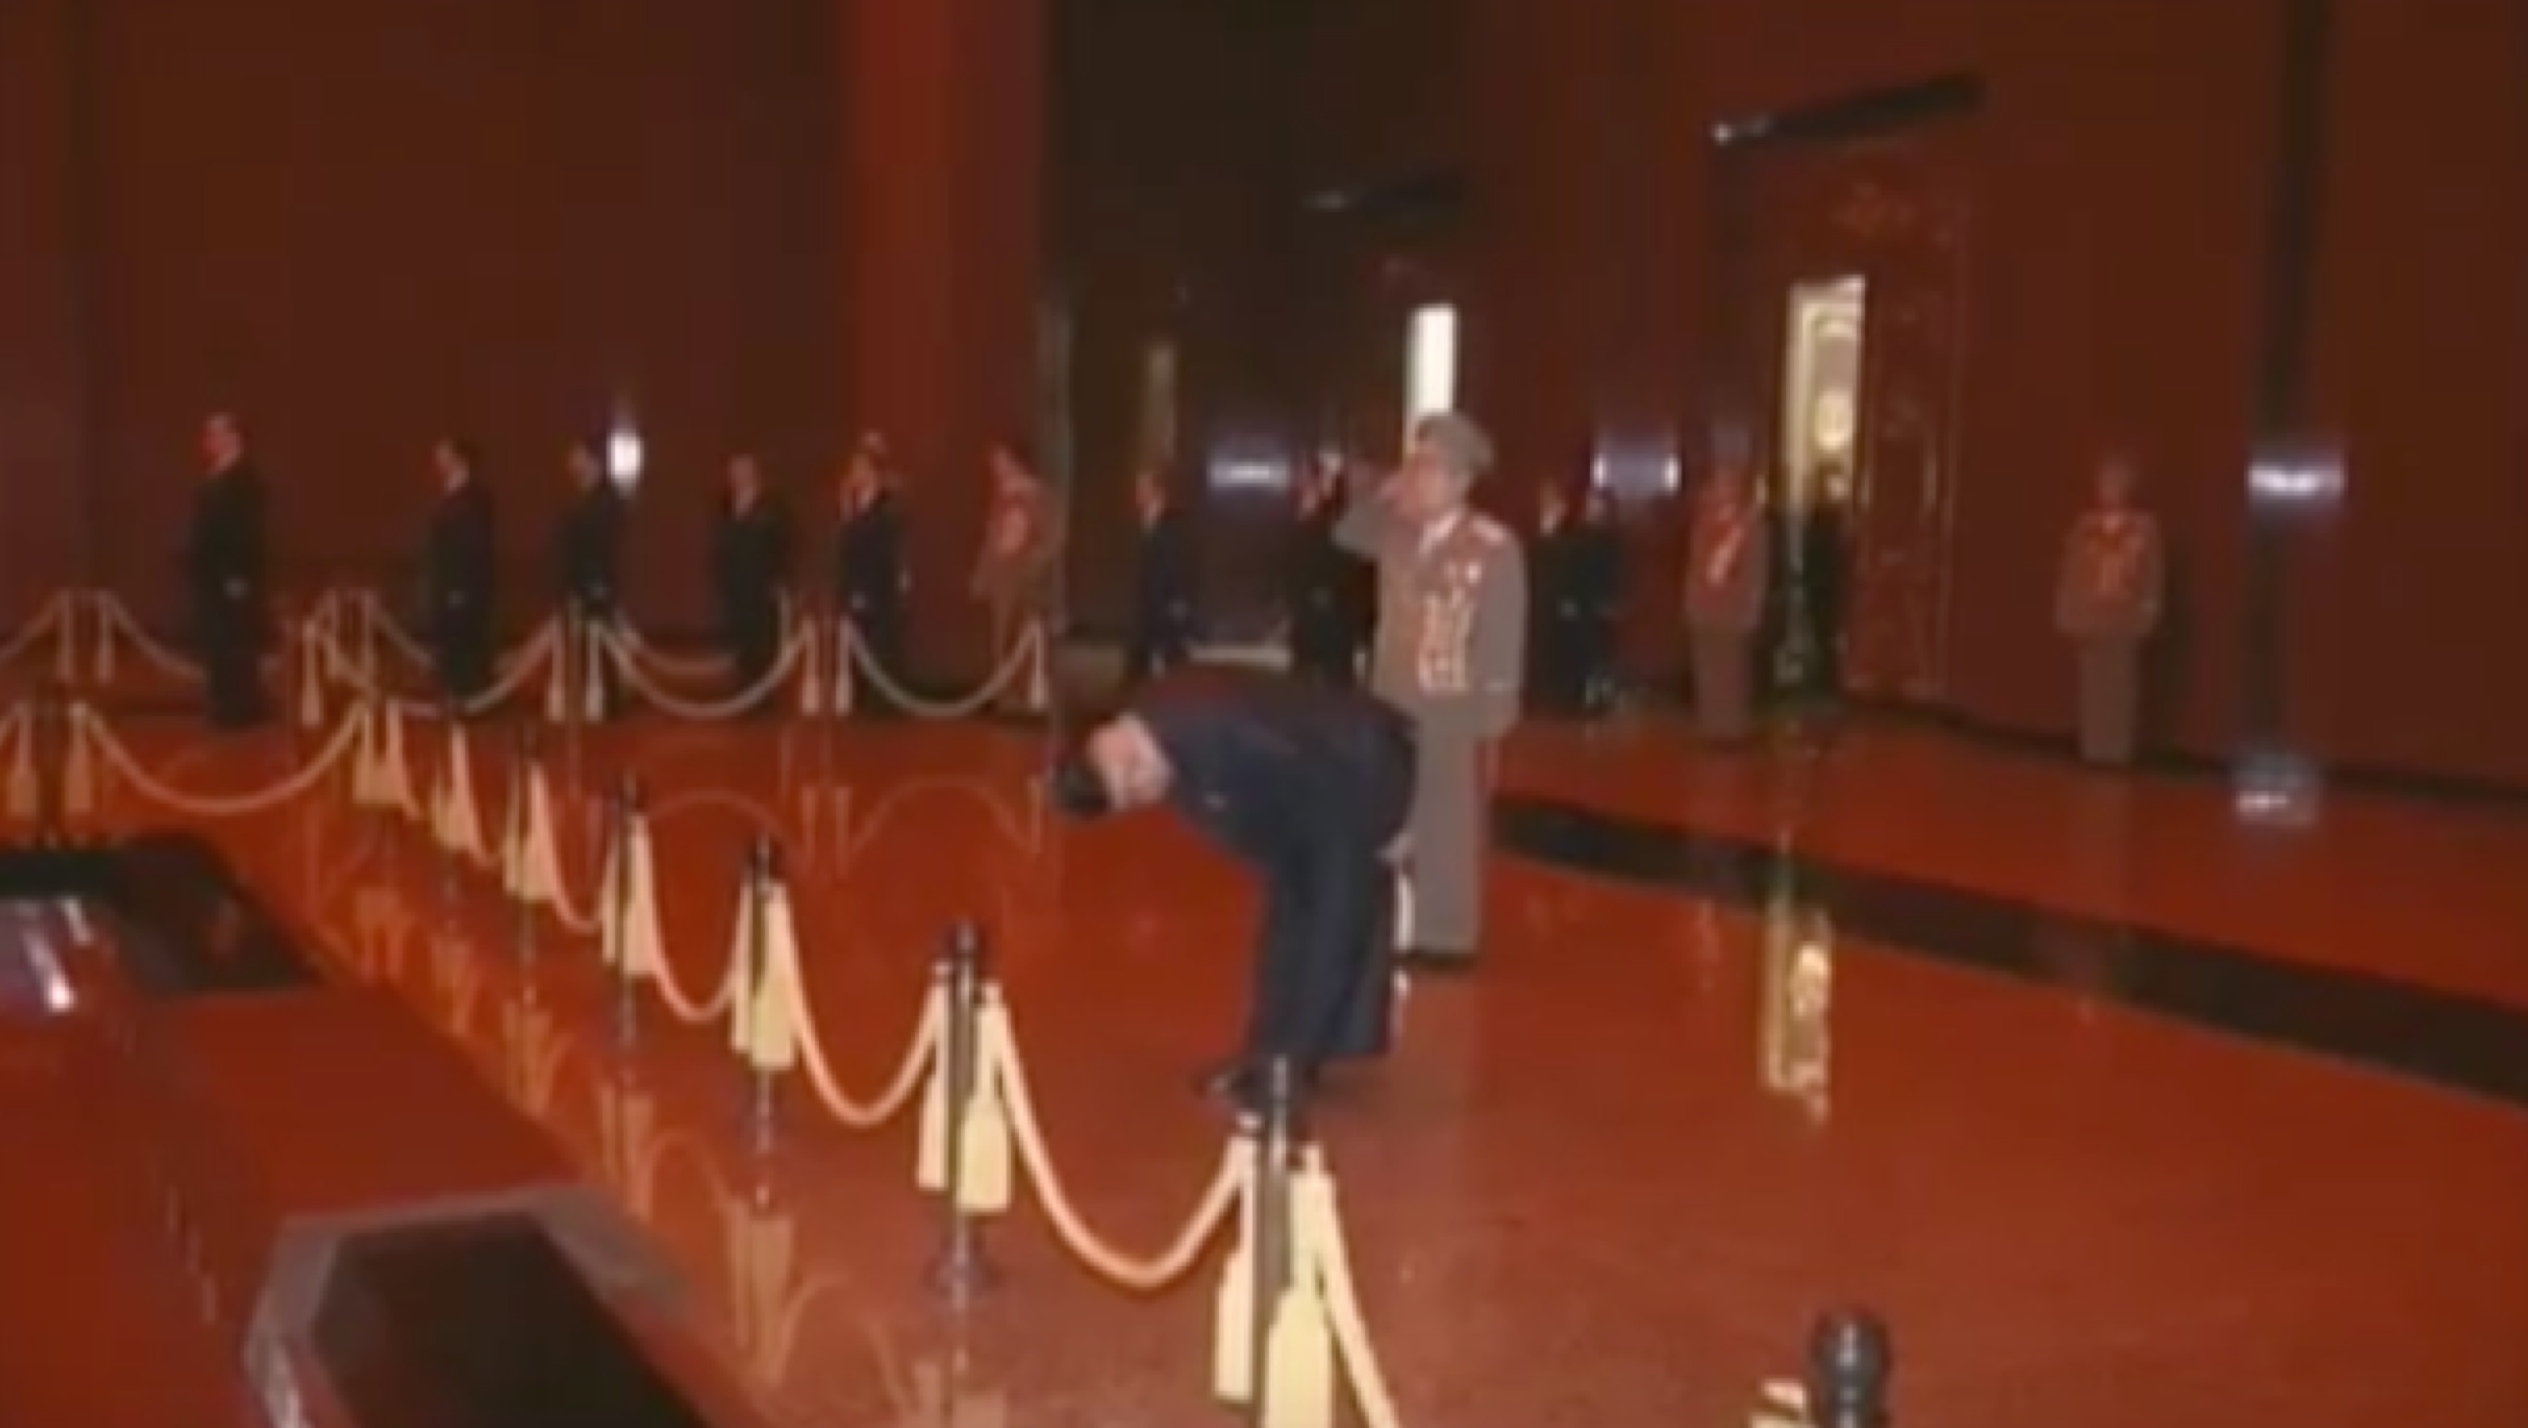 Kim Jong Un bows in front of the preserved remains of his father, late DPRK leader Kim Jong Il, on February 16, 2017 (Photo: Korean Central Television).